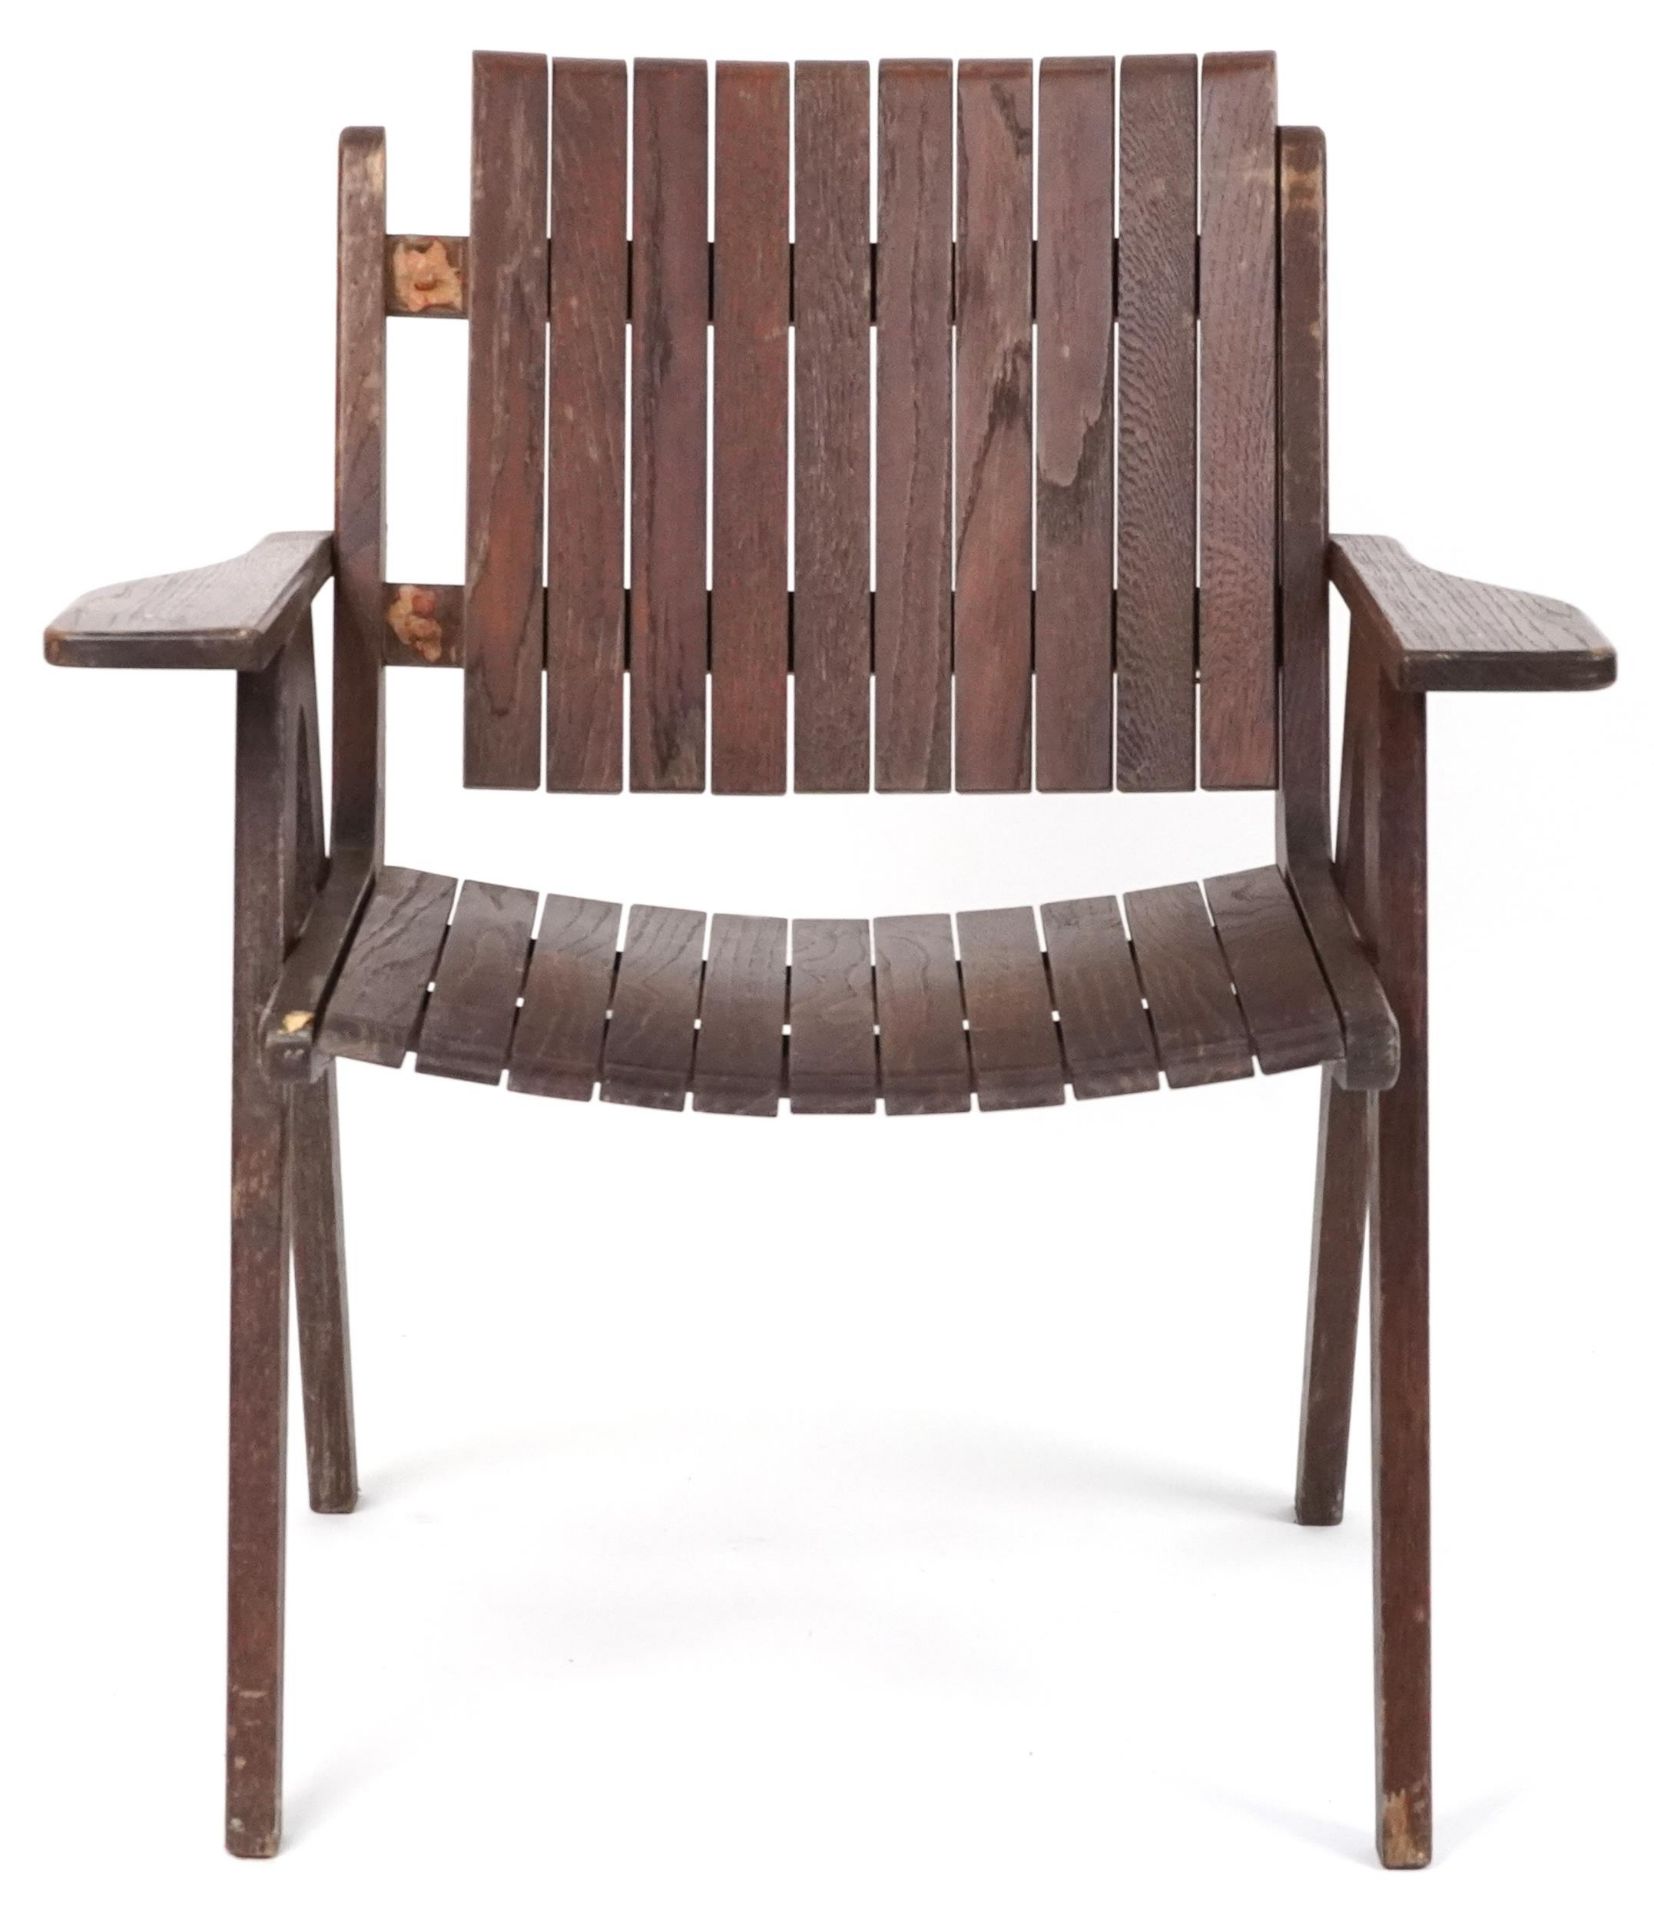 Autoban, stained teak slice chair, 81cm high - Image 2 of 4